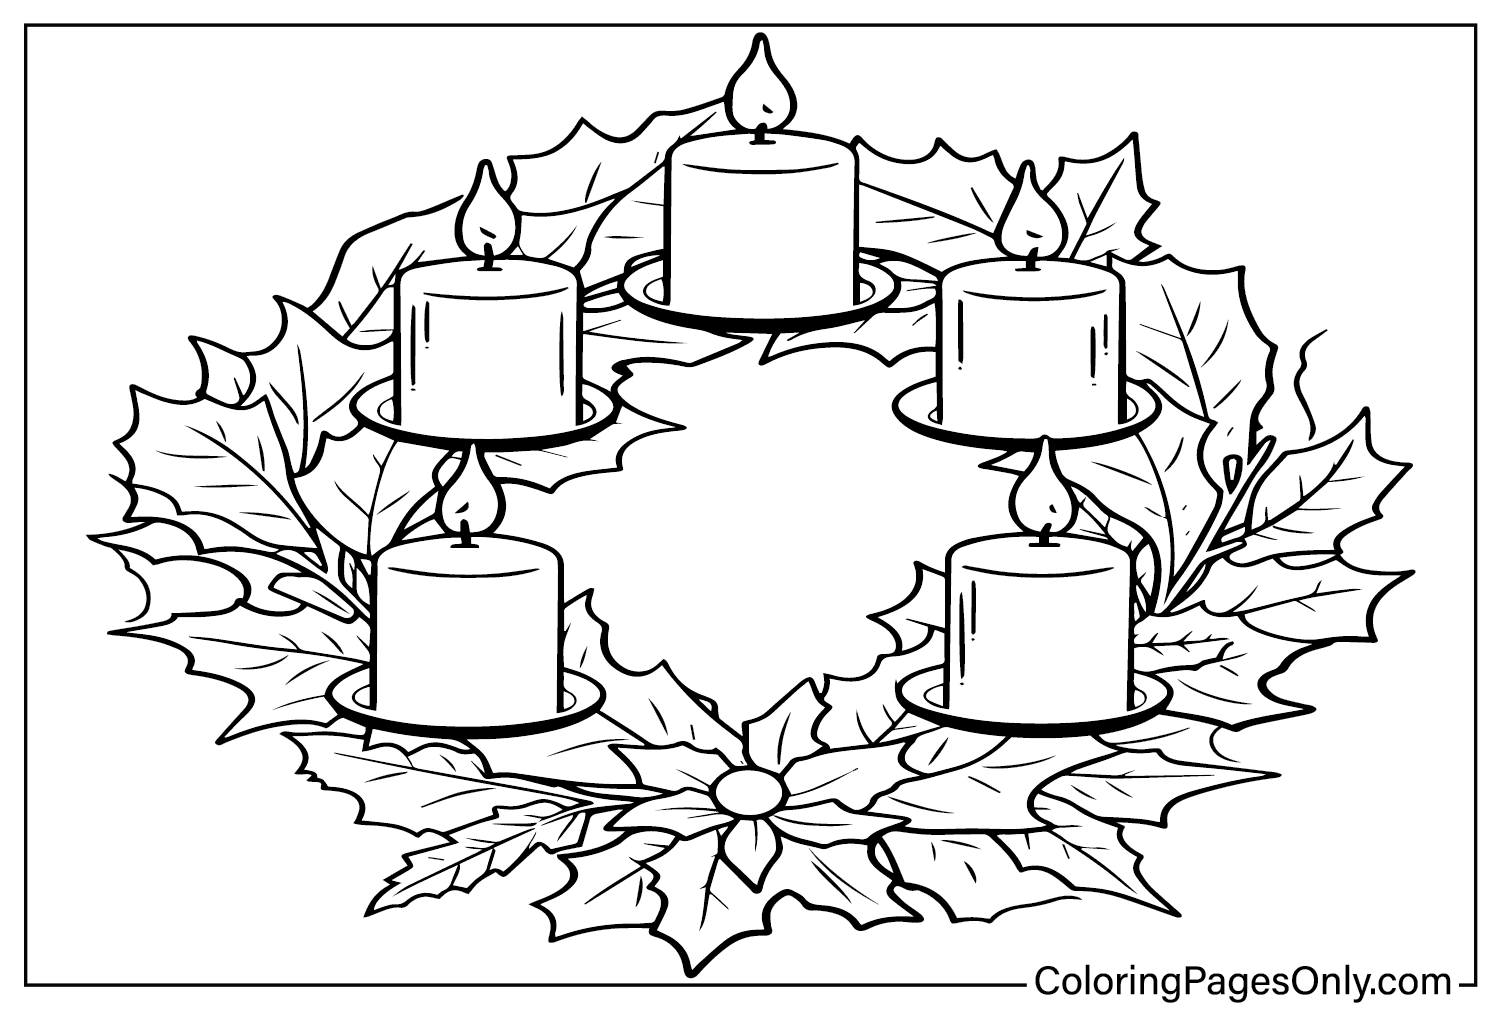 Advent Wreath Coloring Sheet for Kids from Advent Wreath